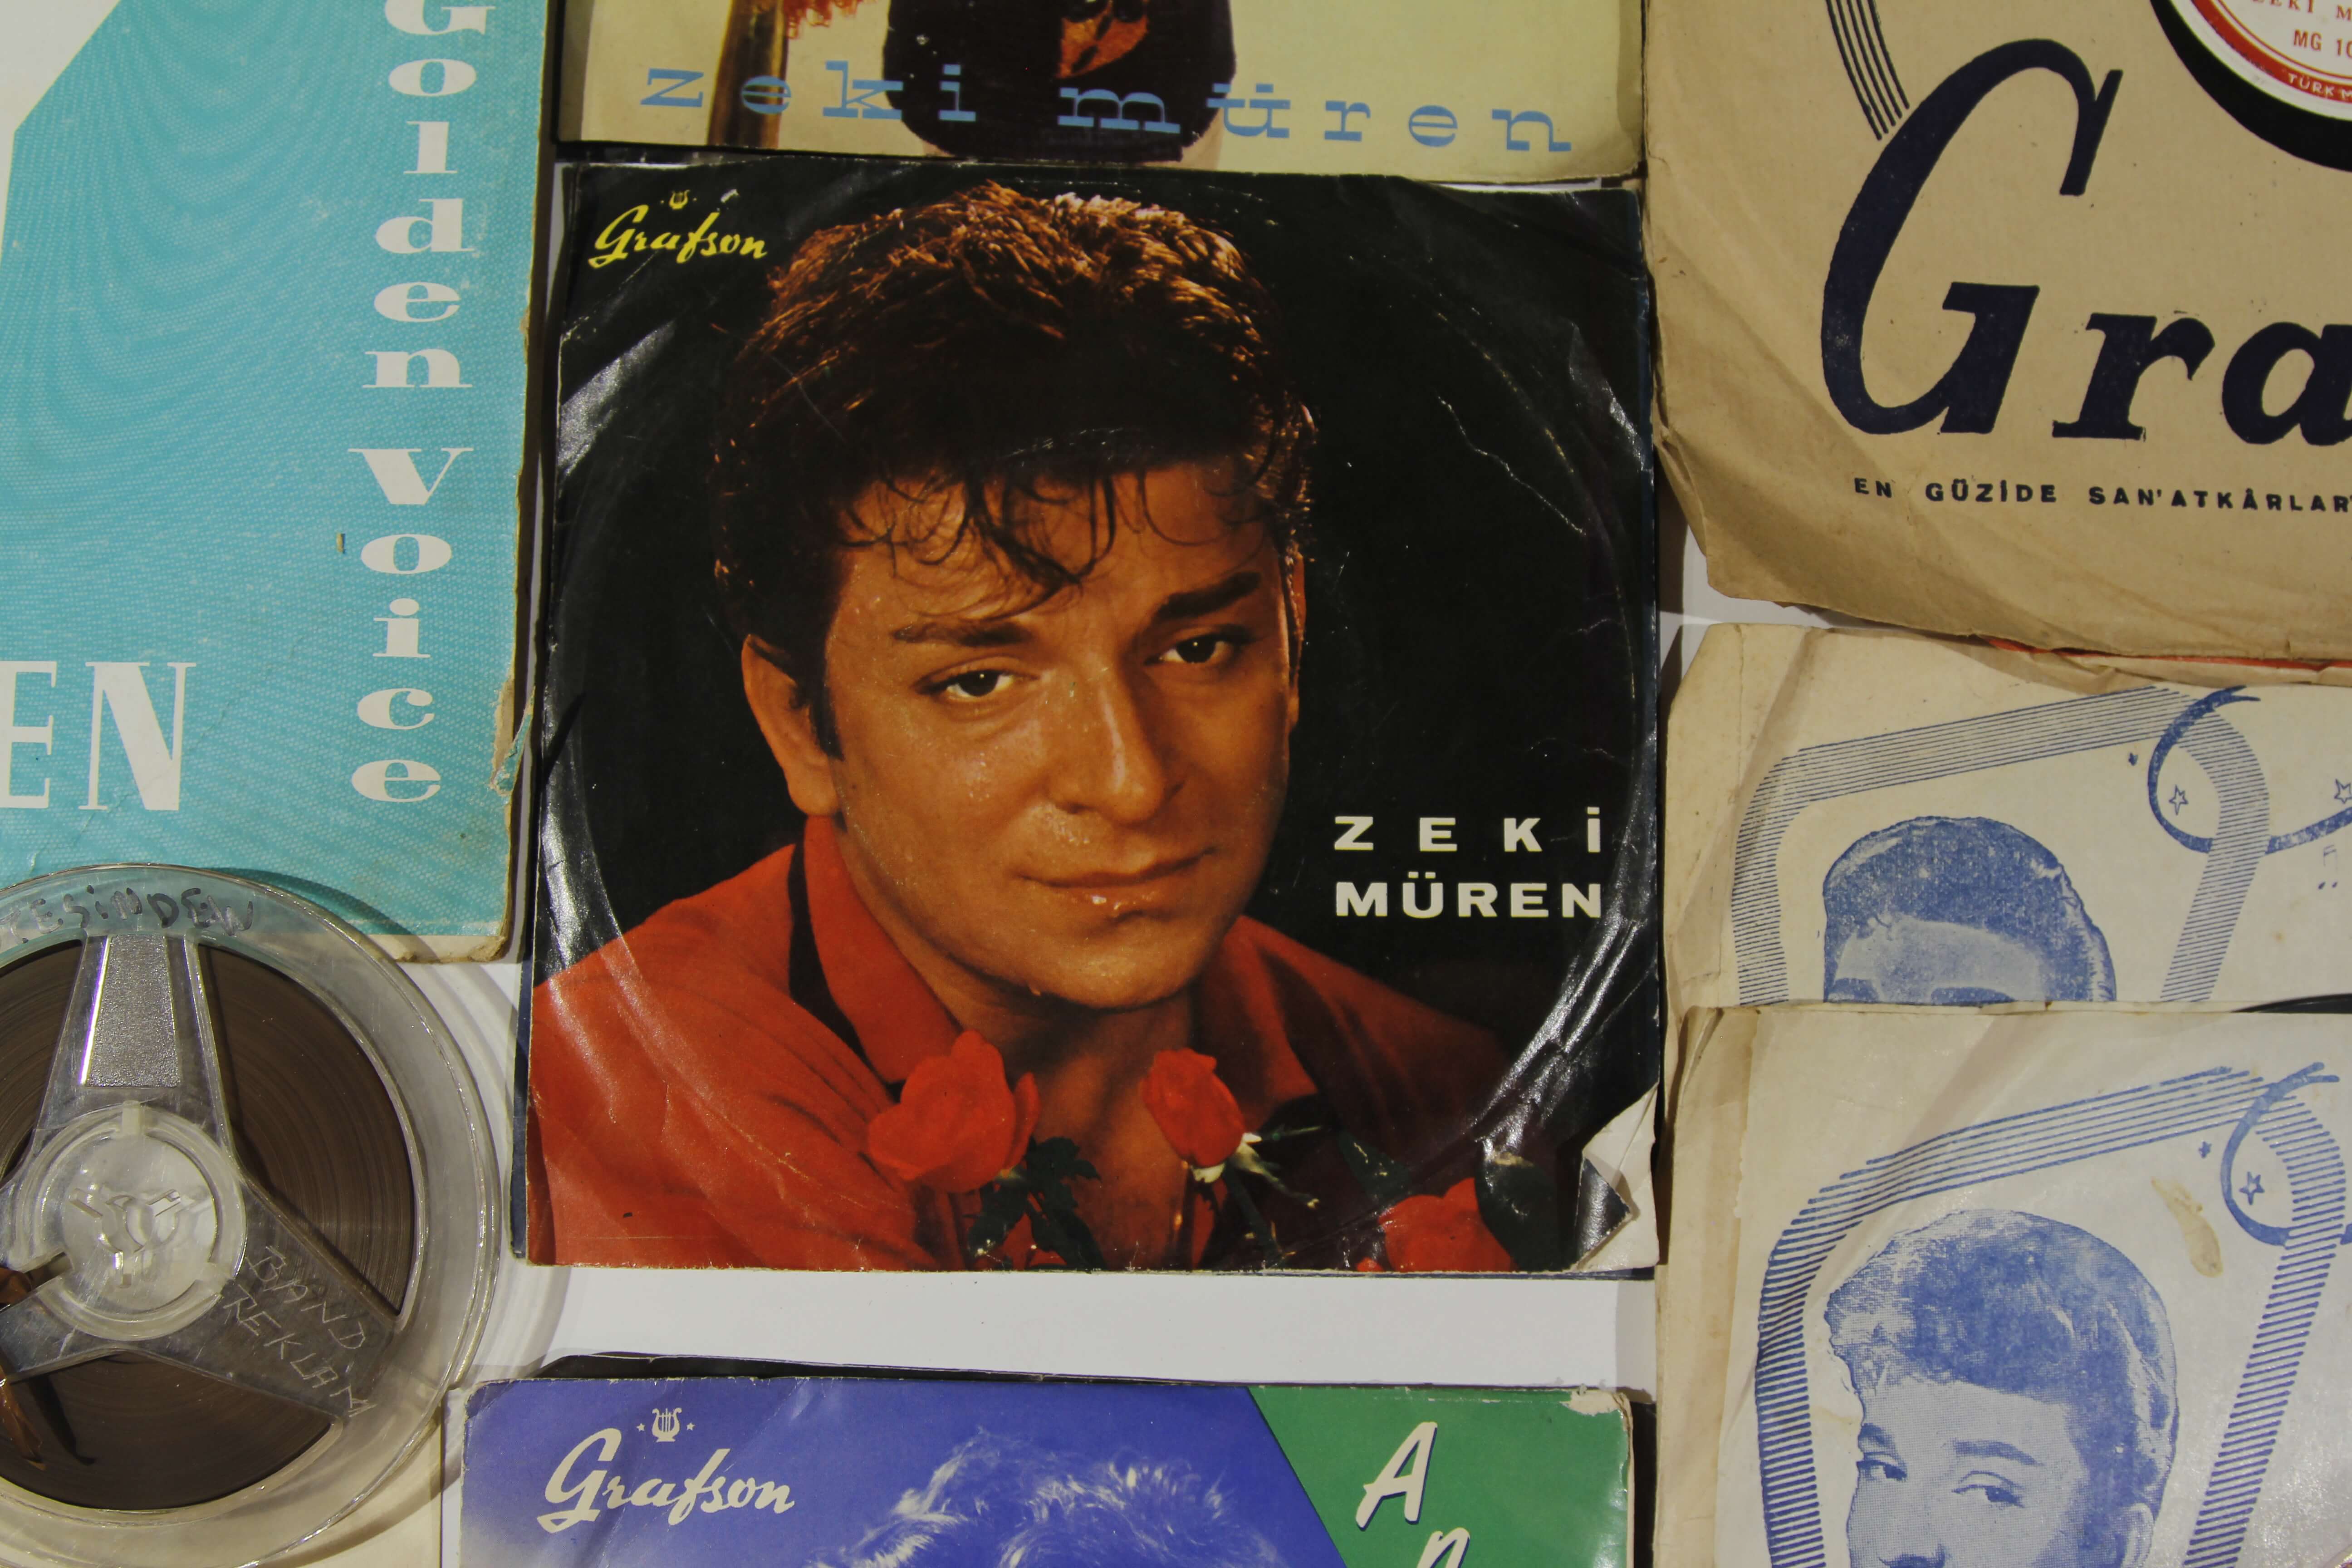 Still from A Prince from Outer Space: Zeki Muren. The record album of Zeki Muren is sitting on a table with other publications and media. On the record is an image of Zeki Muren with some red roses.